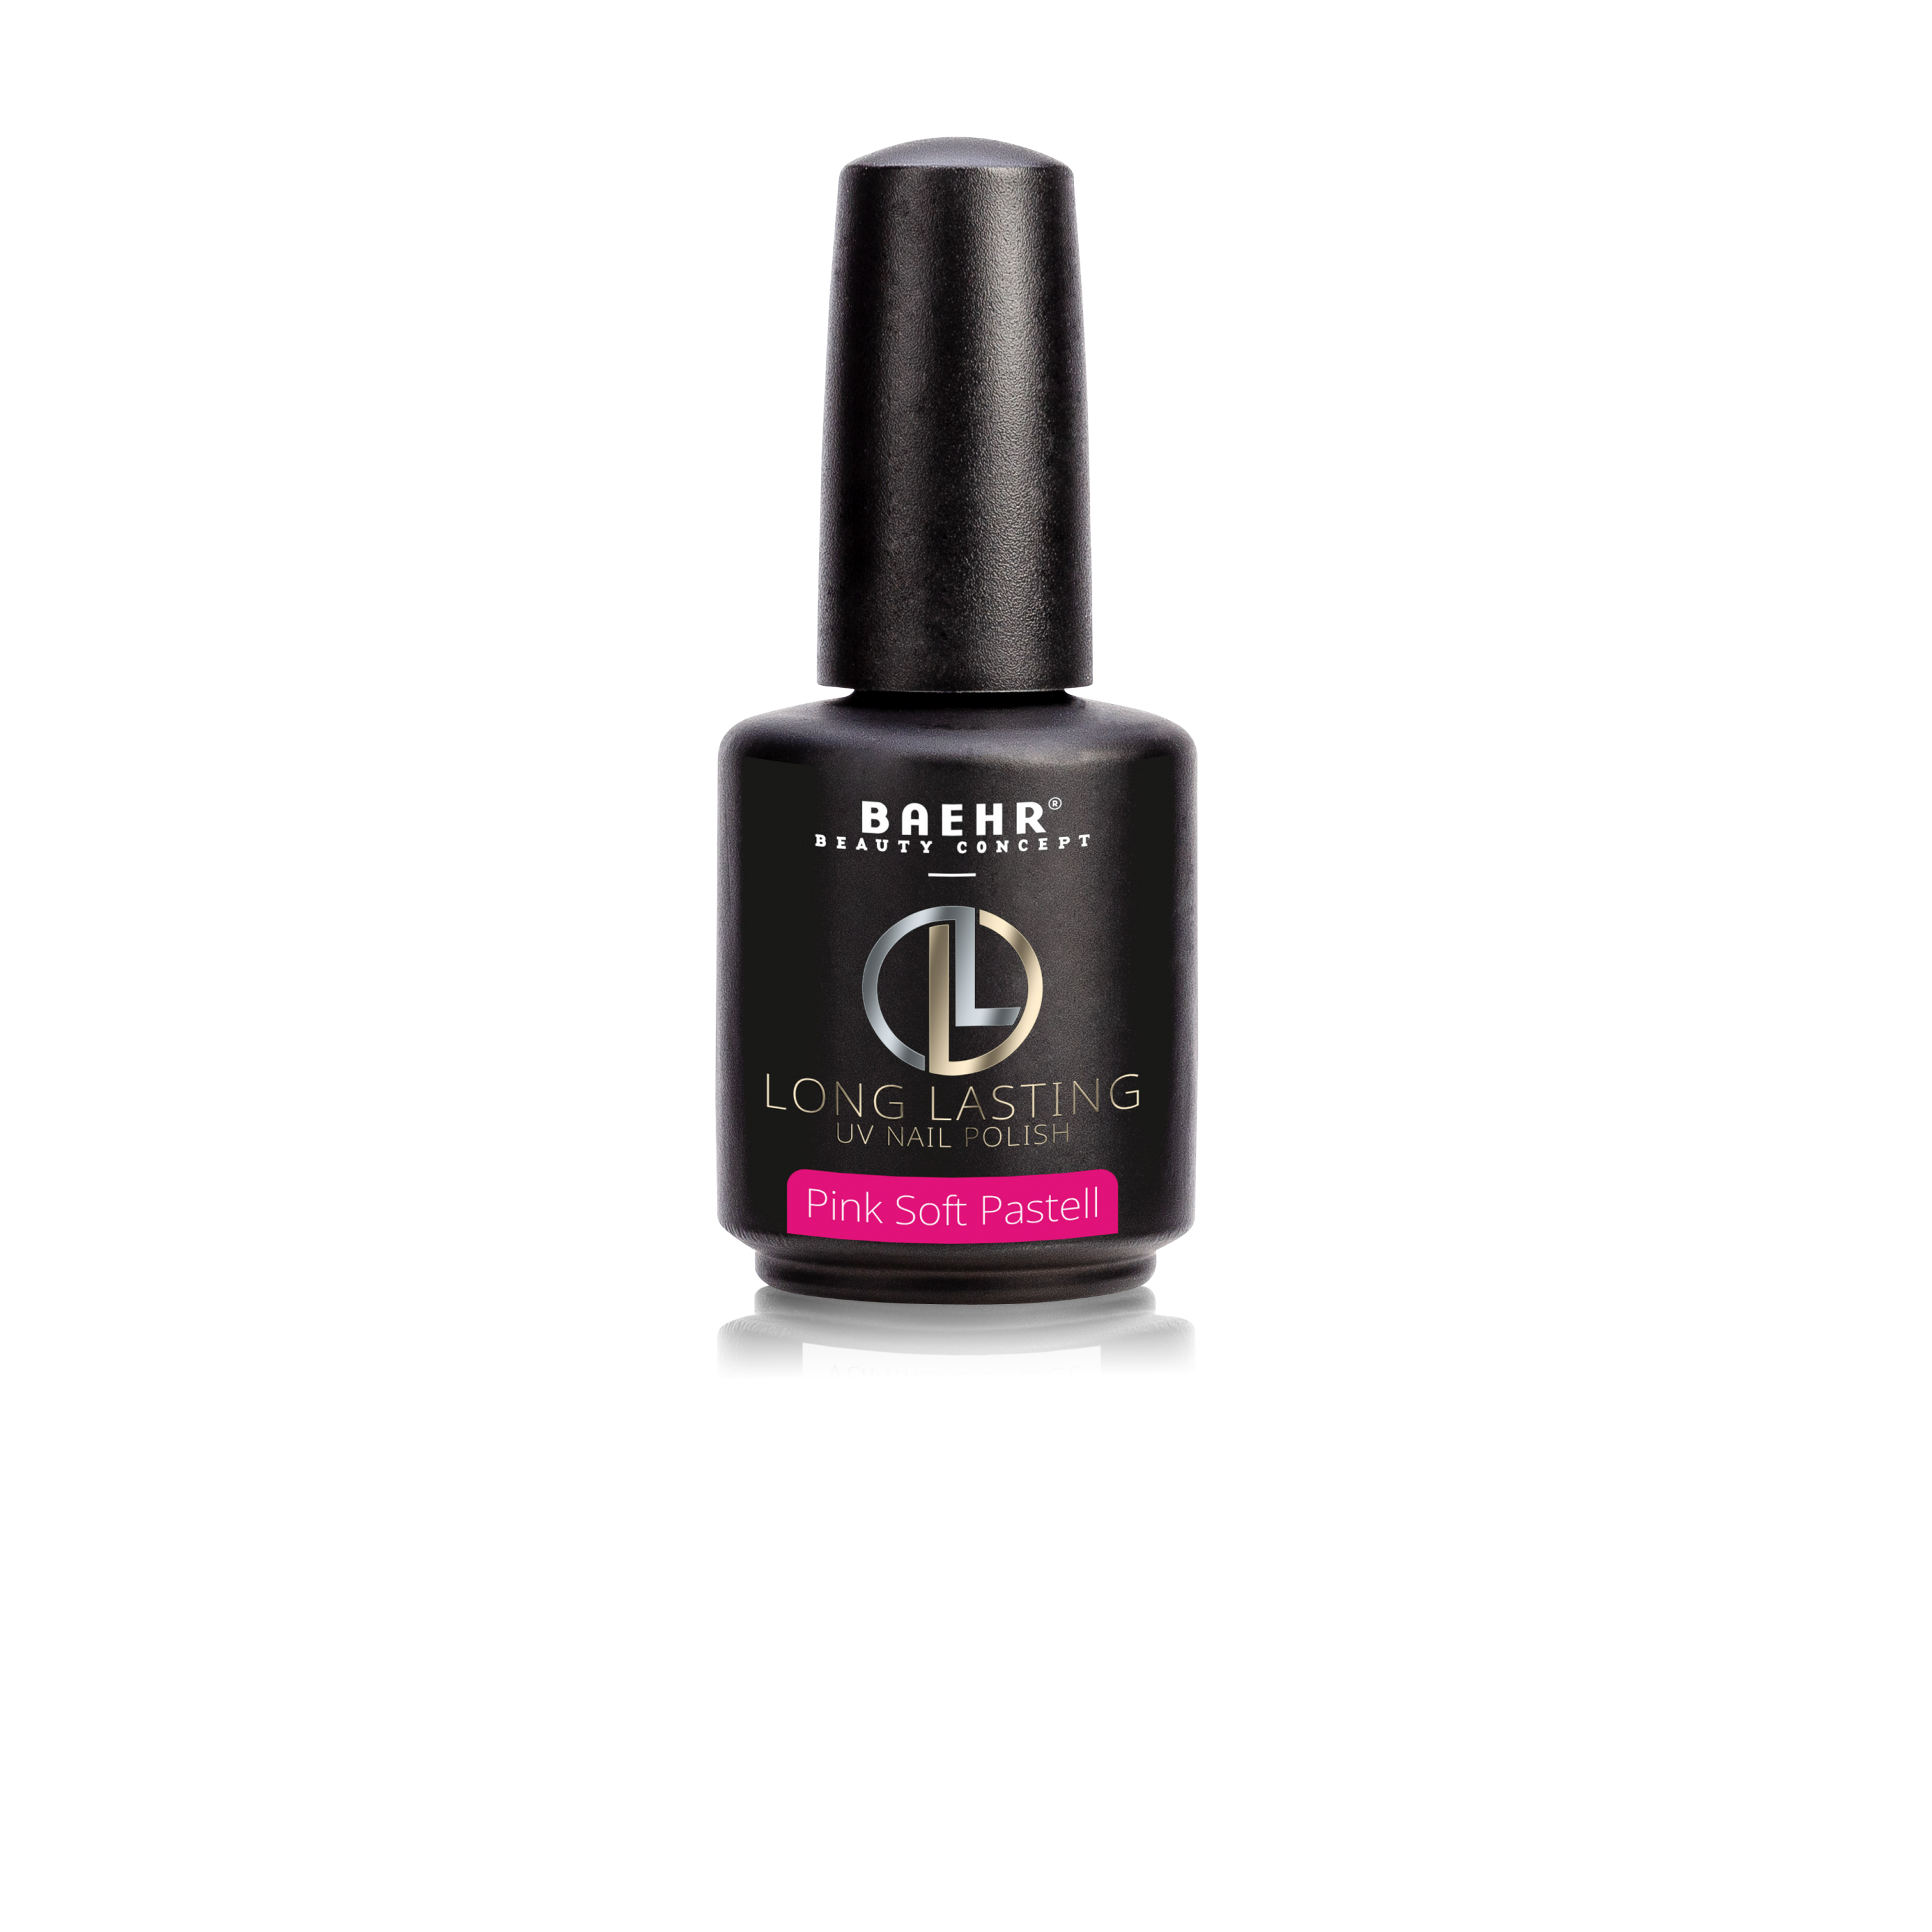 BAEHR BEAUTY CONCEPT - NAILS Long-Lasting Pink Soft Pastell 12 ml